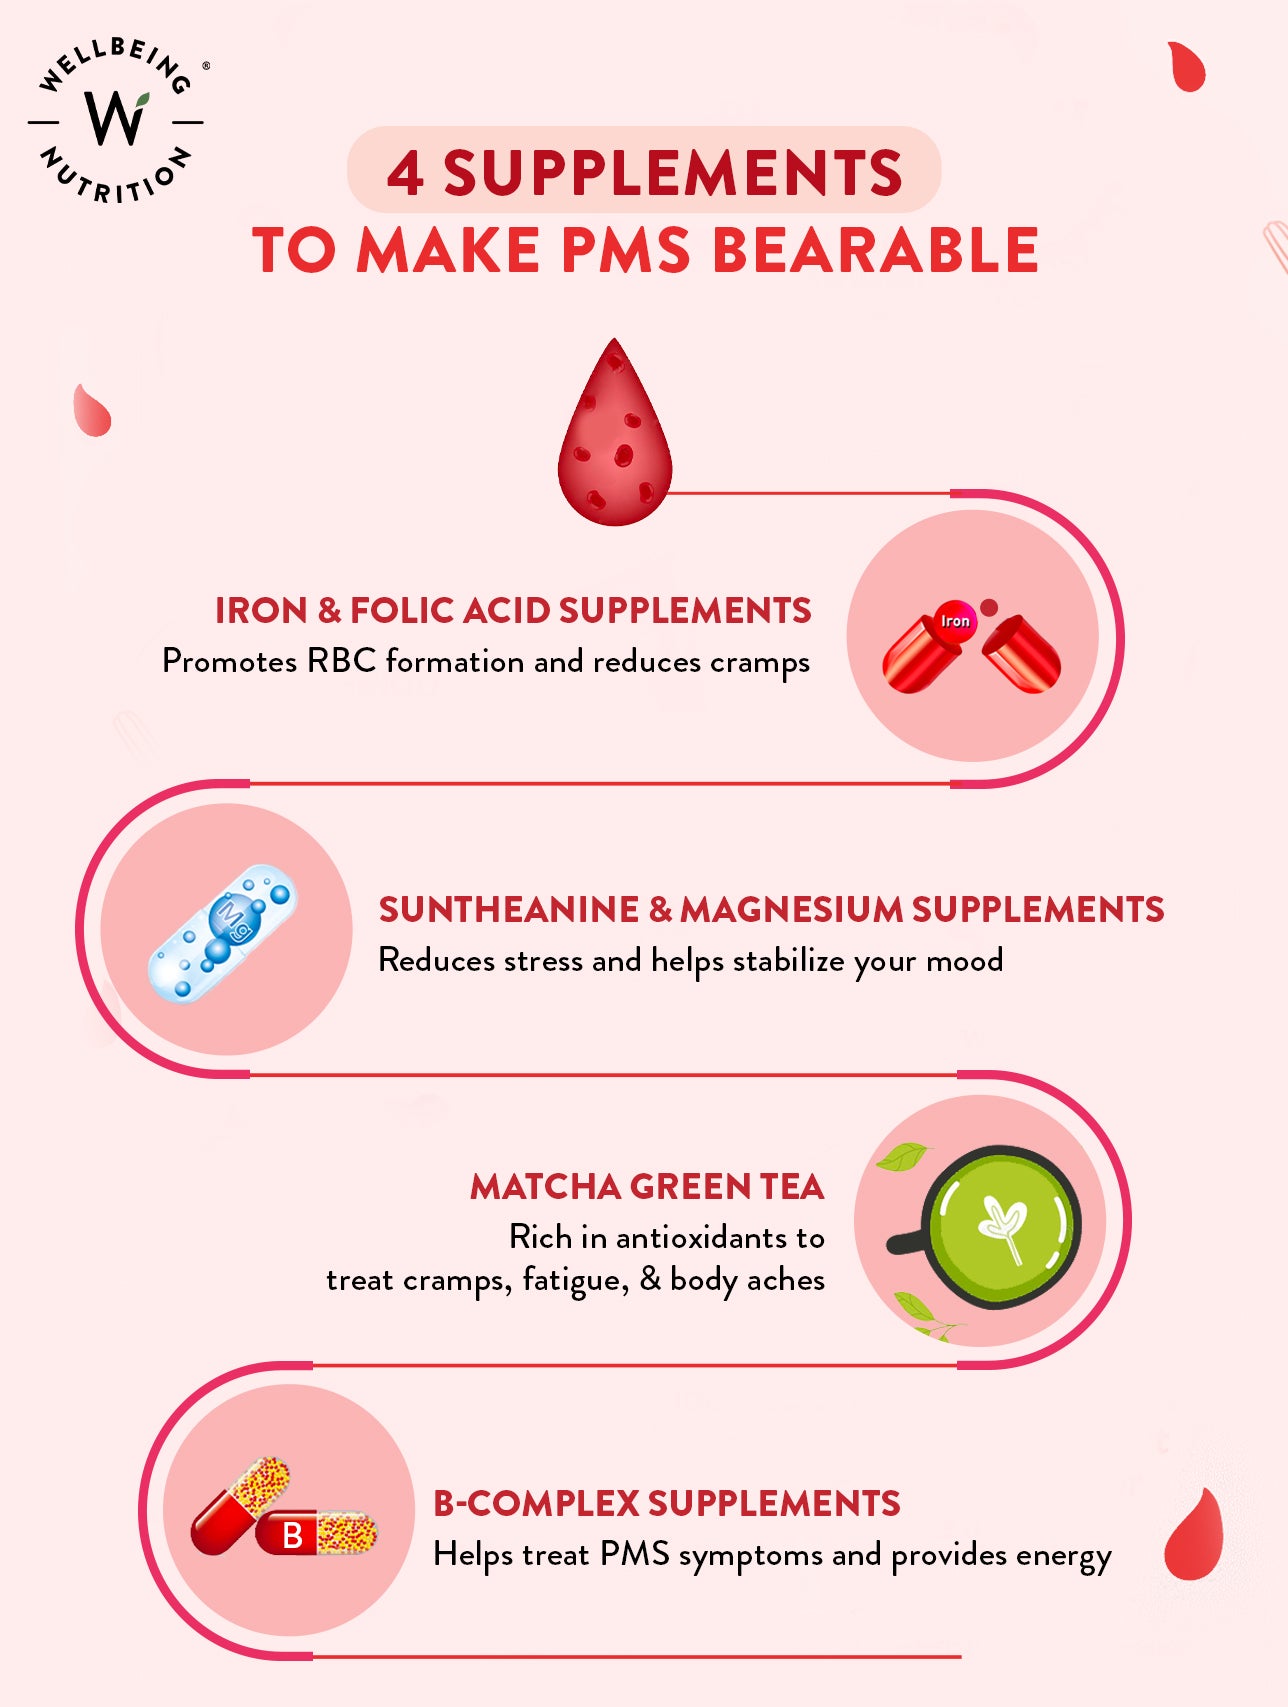 Menstrual Cramps Get Squashed By Great Nutrition - Nutrition Heartbeat